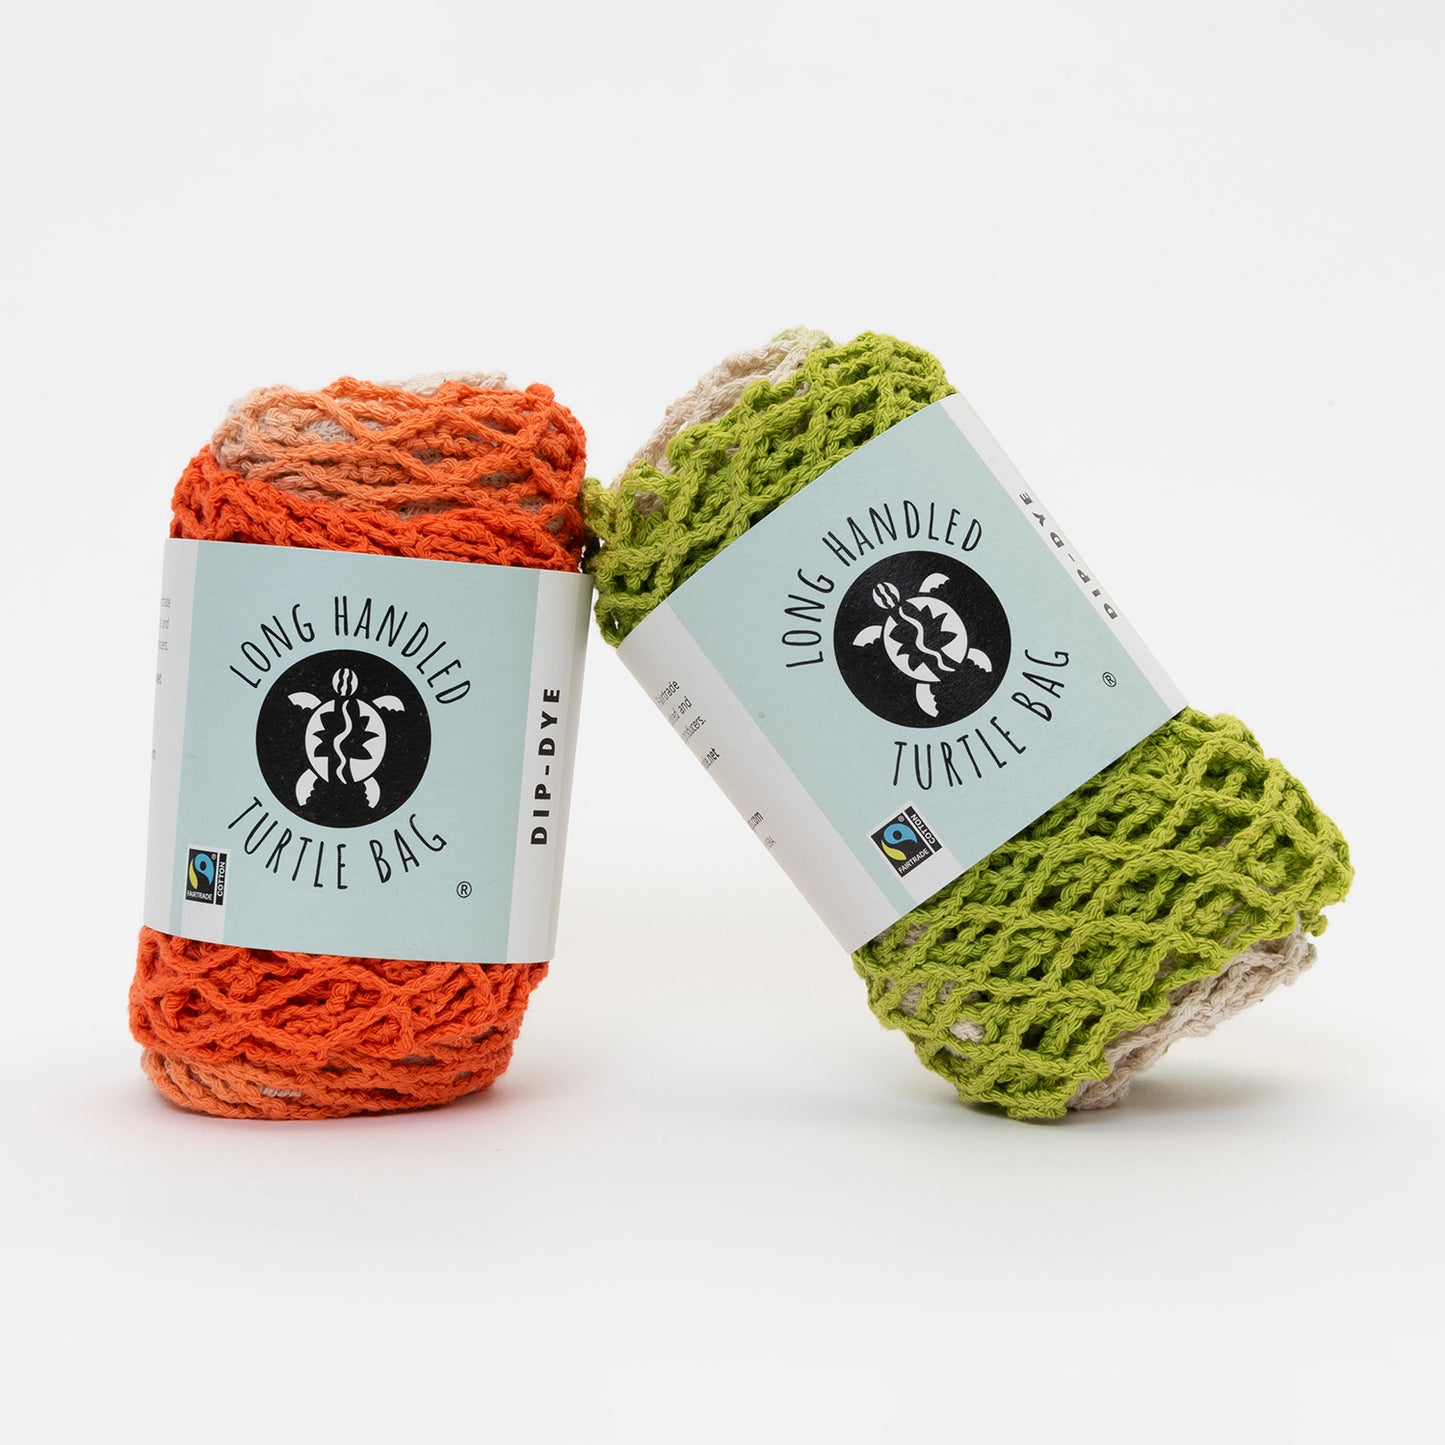 lime and orange string bags in packaging